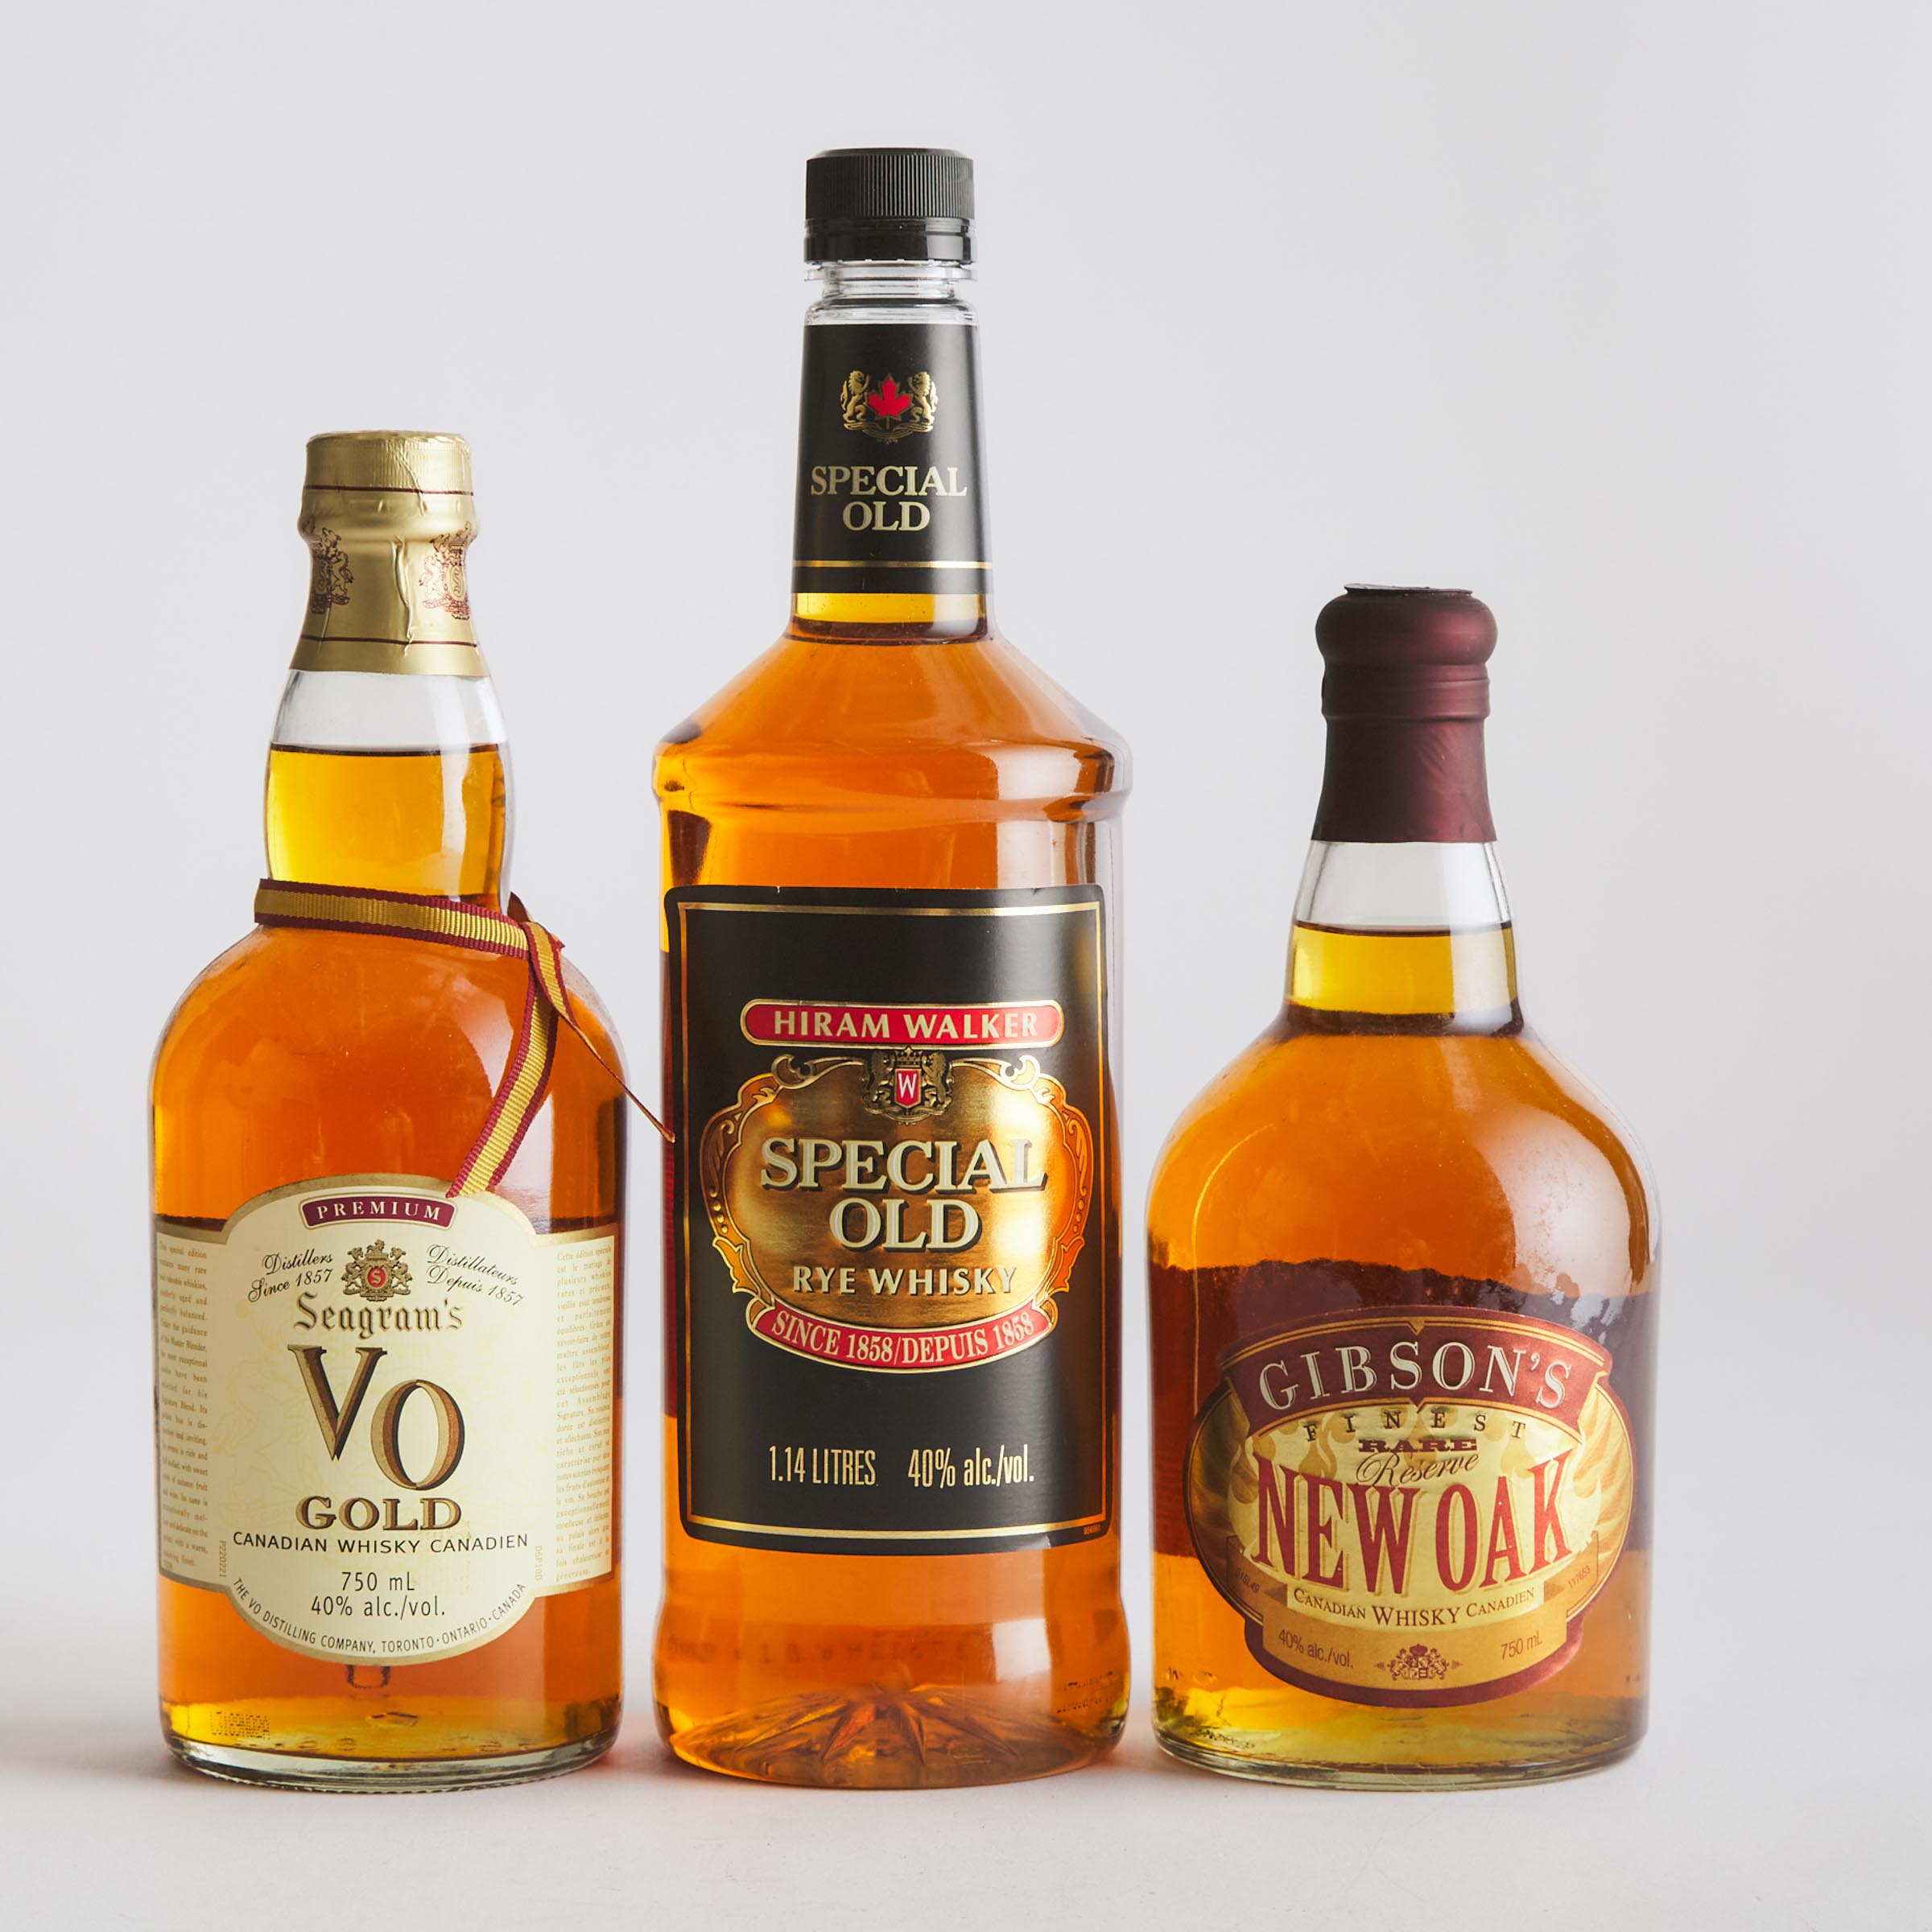 GIBSON'S FINEST NEW OAK CANADIAN WHISKY (ONE 750 ML)
HIRAM WALKER SPECIAL OLD RYE WHISKY (ONE 1140 ML)
SEAGRAM'S VO GOLD CANADIAN WHISKY (ONE 750 ML)